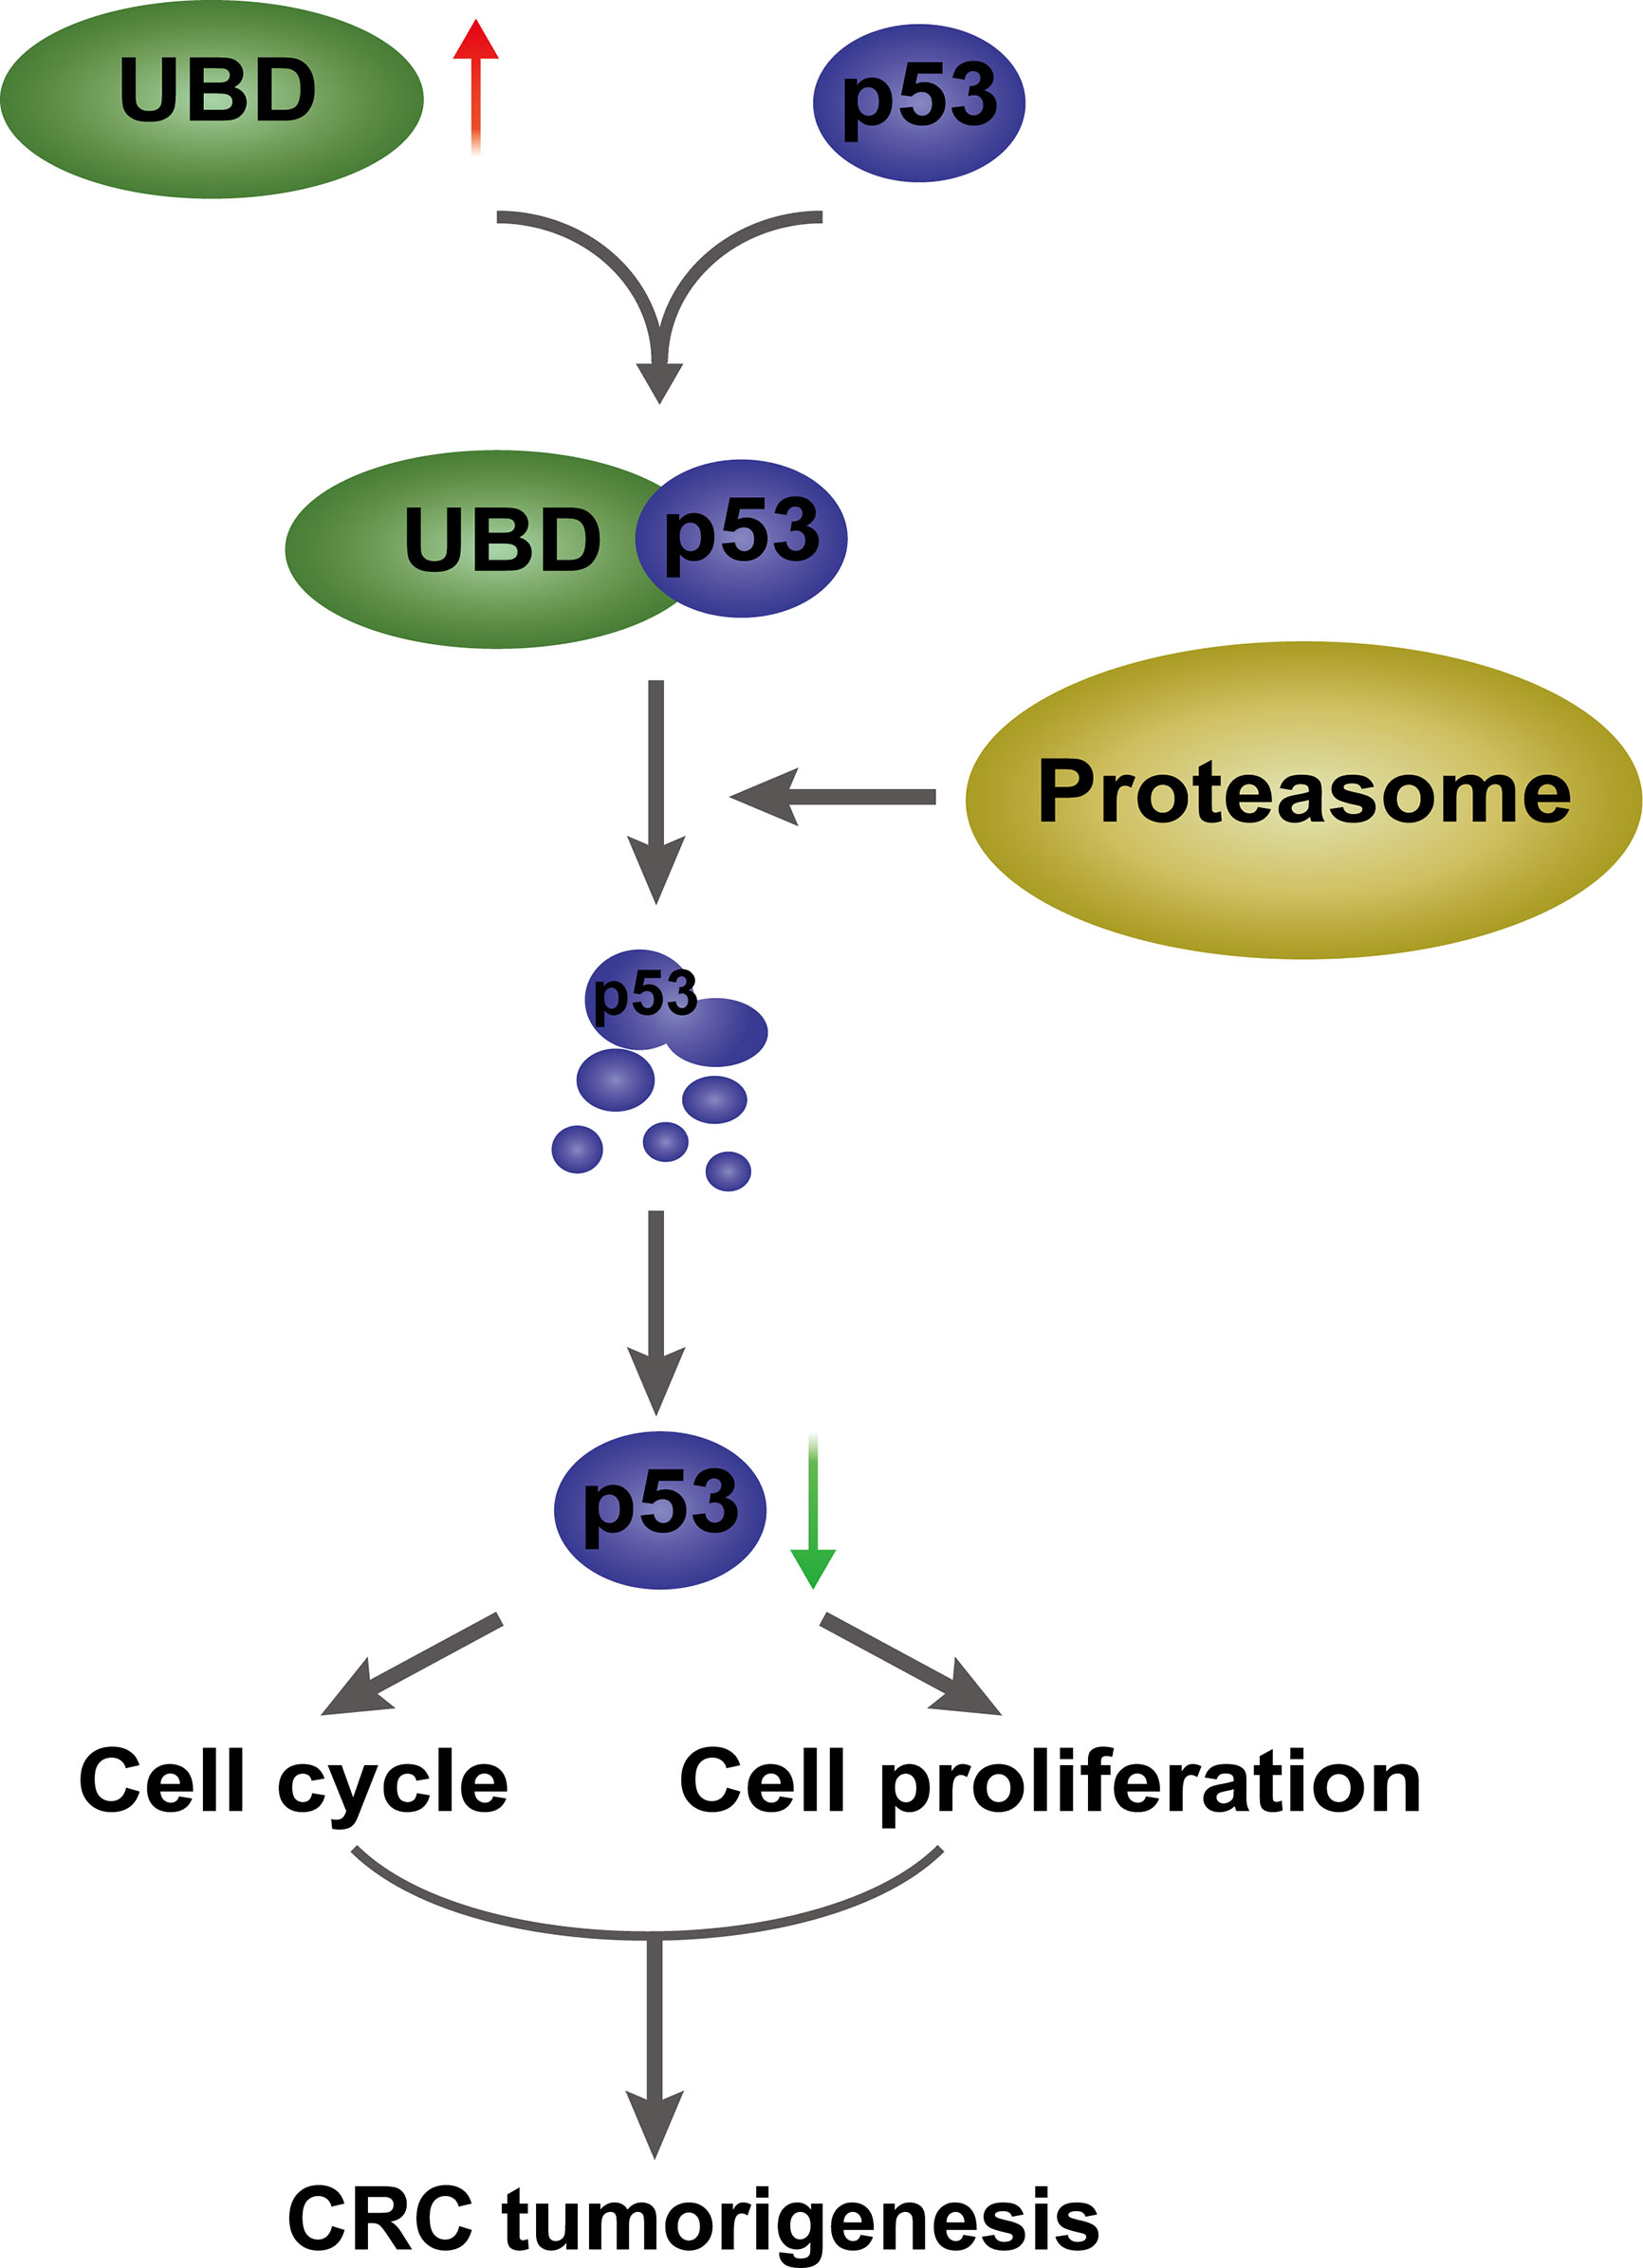 Frontiers | Ubiquitin-Like Protein UBD Promotes Cell Proliferation 